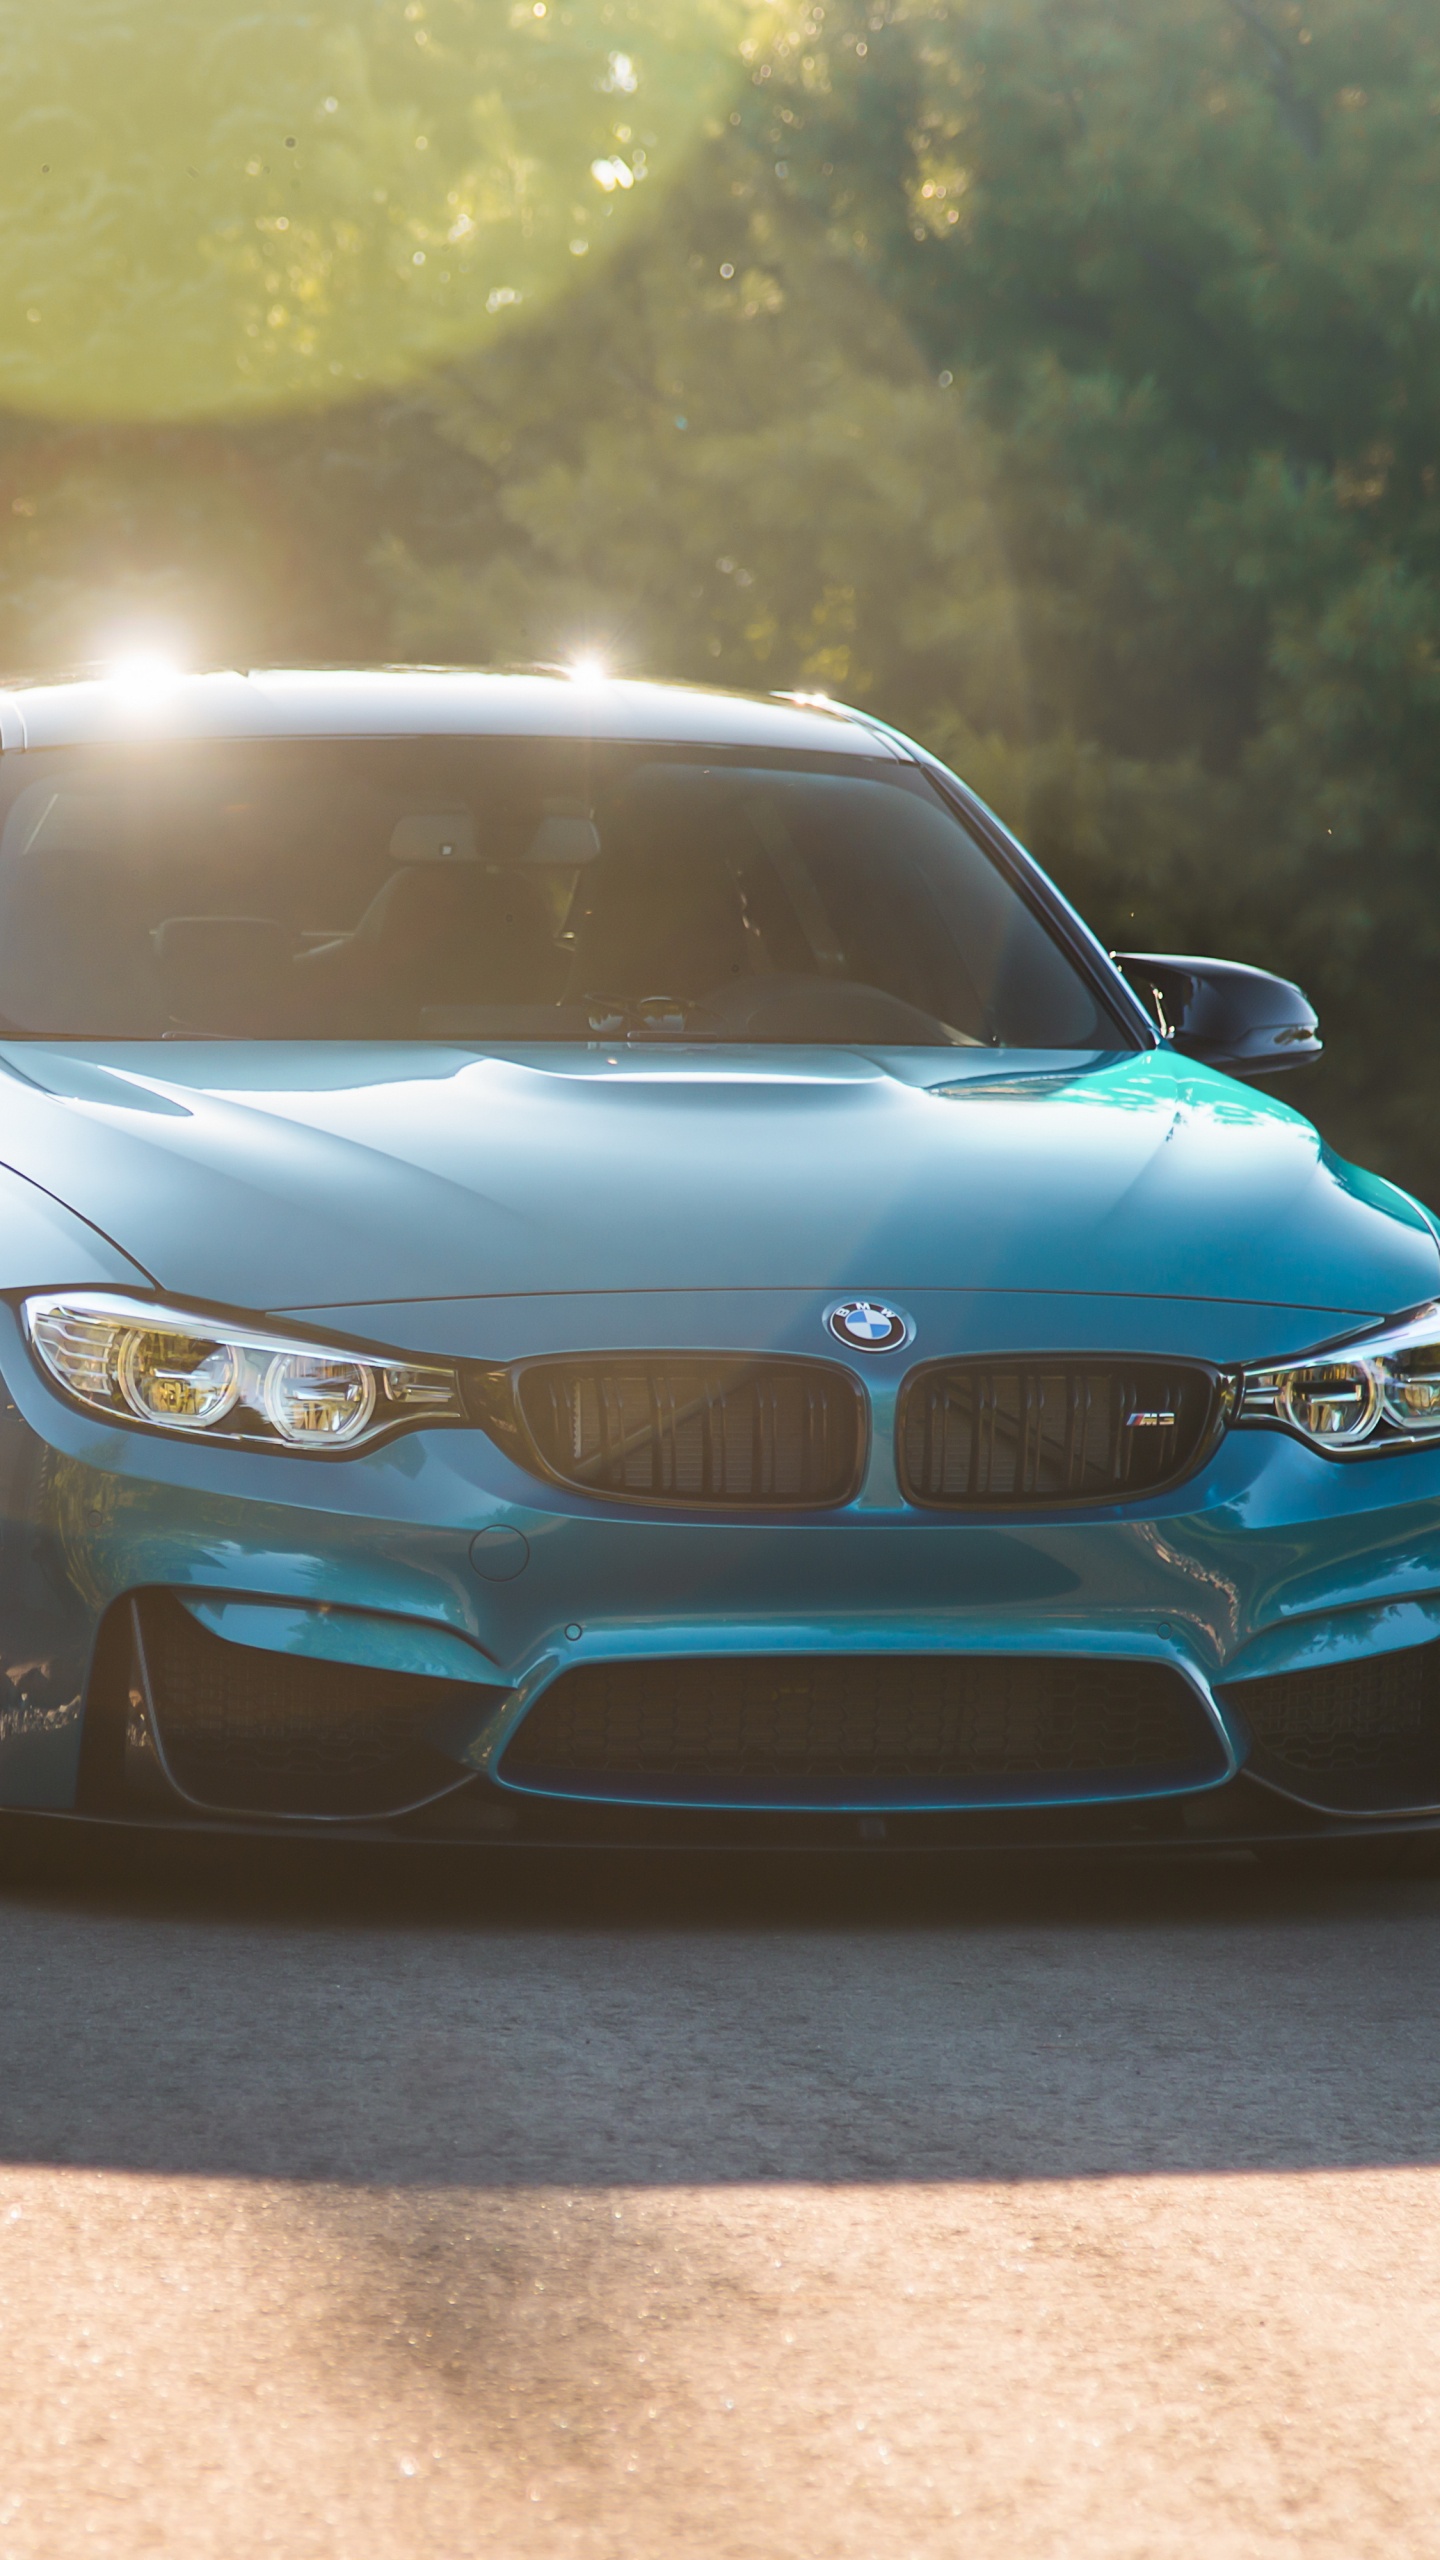 Blue Bmw m 3 Coupe Parked on Gray Concrete Pavement. Wallpaper in 1440x2560 Resolution